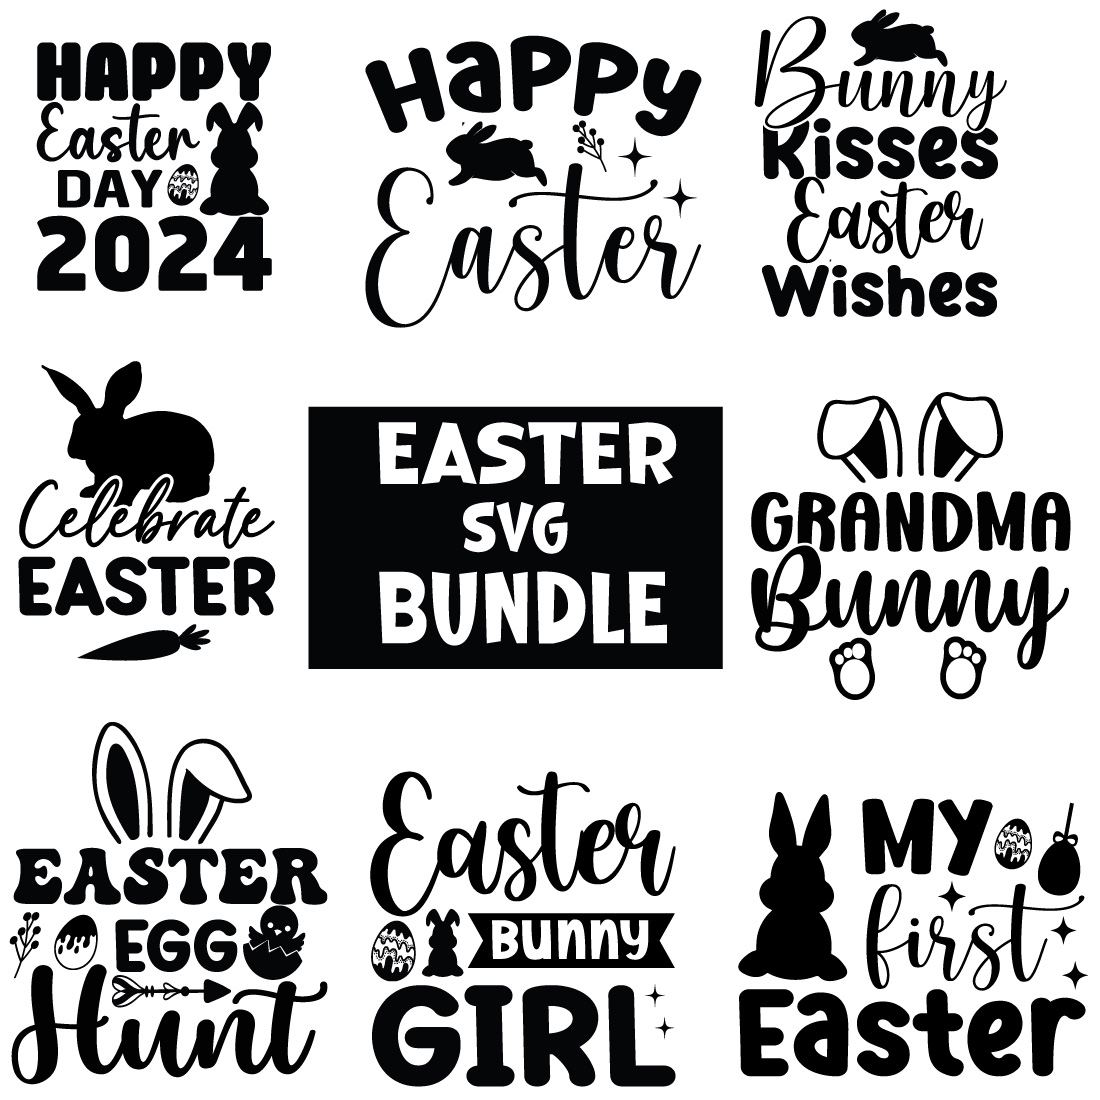 Retro,Happy Easter Svg,Png,Bunny Svg,Retro Easter Svg,Easter Quotes,Spring Svg,Easter Shirt Svg,Easter Gift Svg,Funny Easter Svg,Bunny Day, Egg for Kids,Cut Files, cover image.